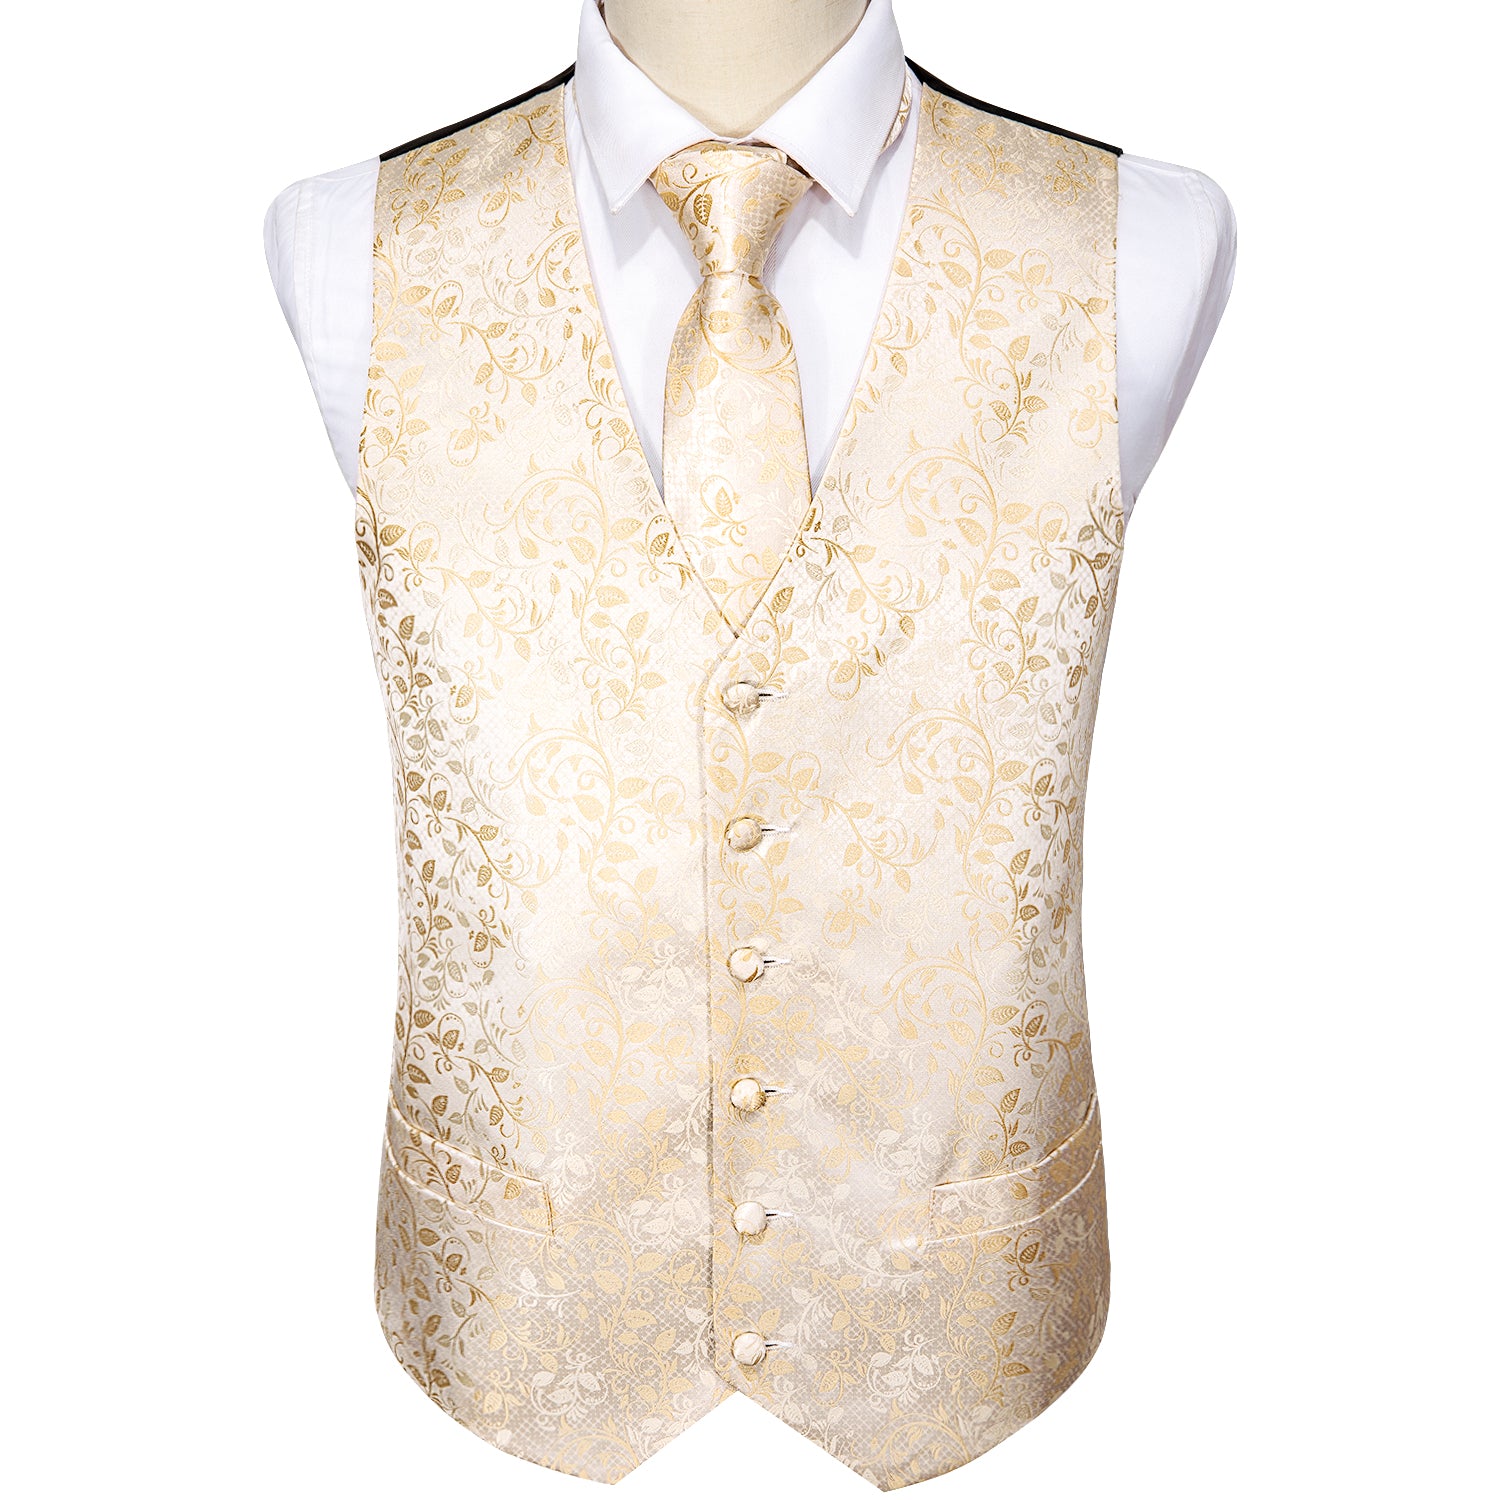 champagne vest and tie